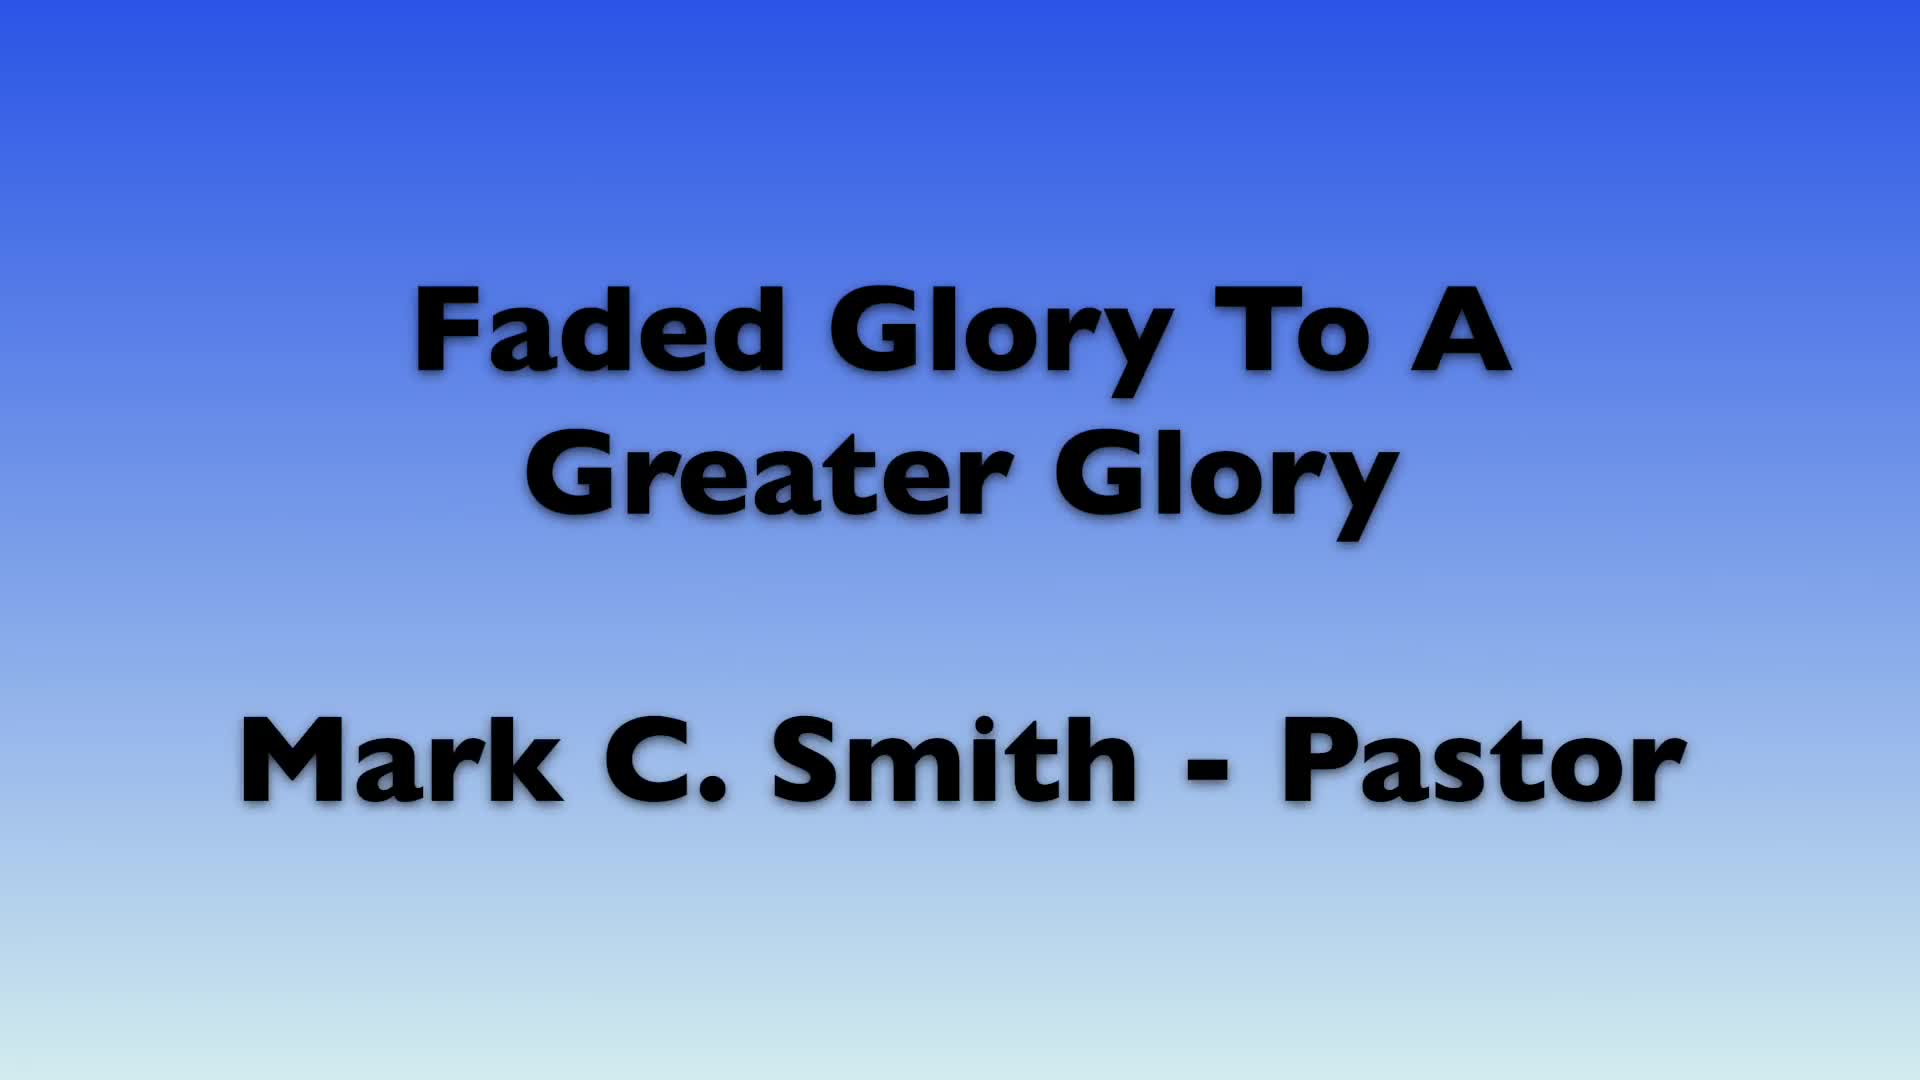 Faded Glory to Greater Glory